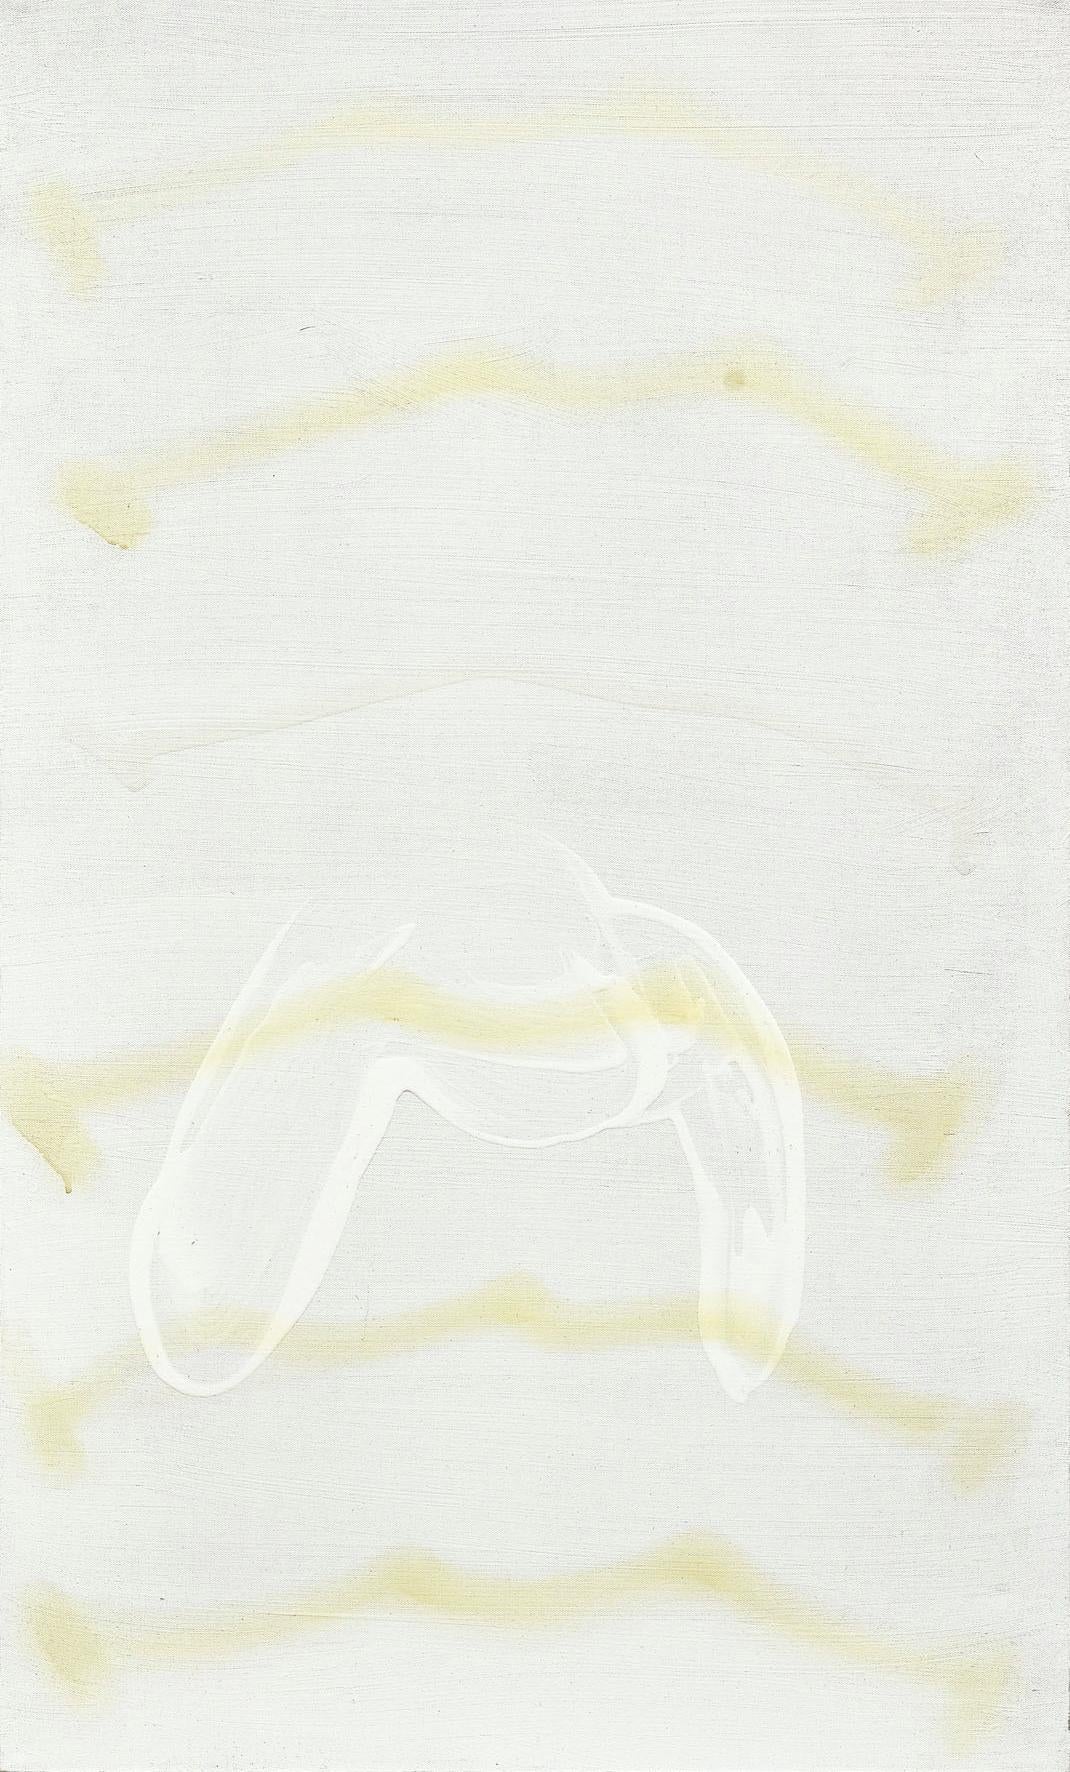 Mel Reese Figurative Painting - "Pence", contemporary all white abstract acrylic & spray paint painting